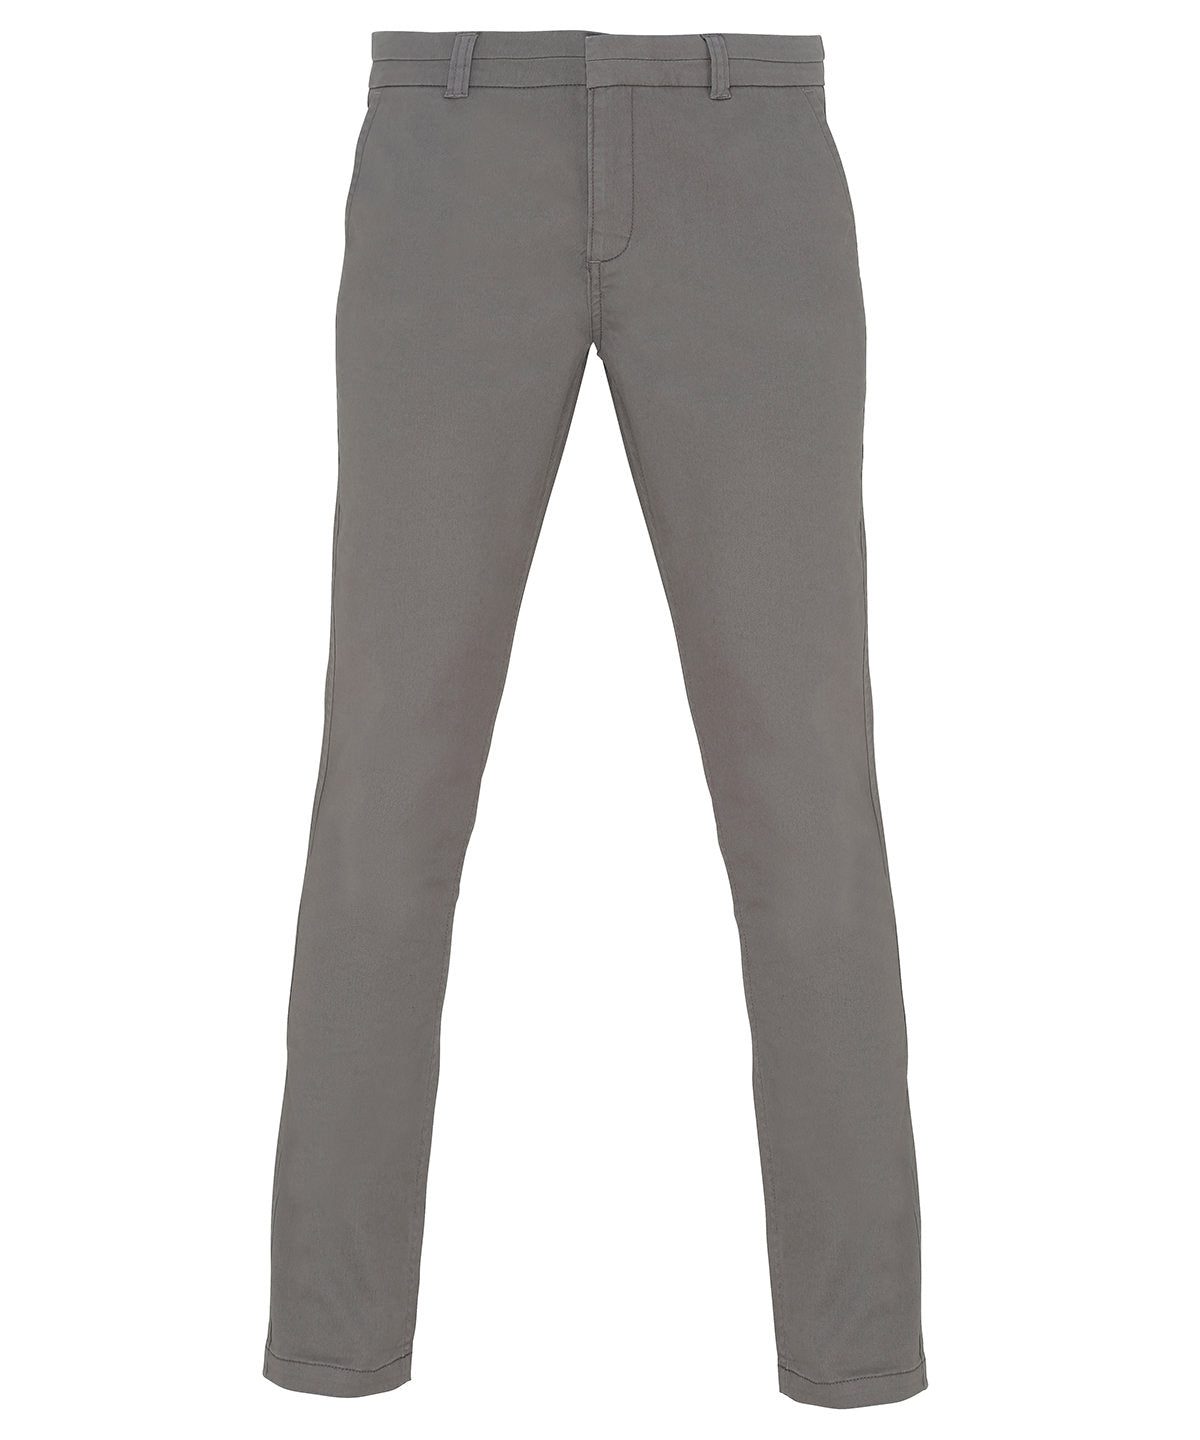 Personalised Trousers - Black Asquith & Fox Women's chinos